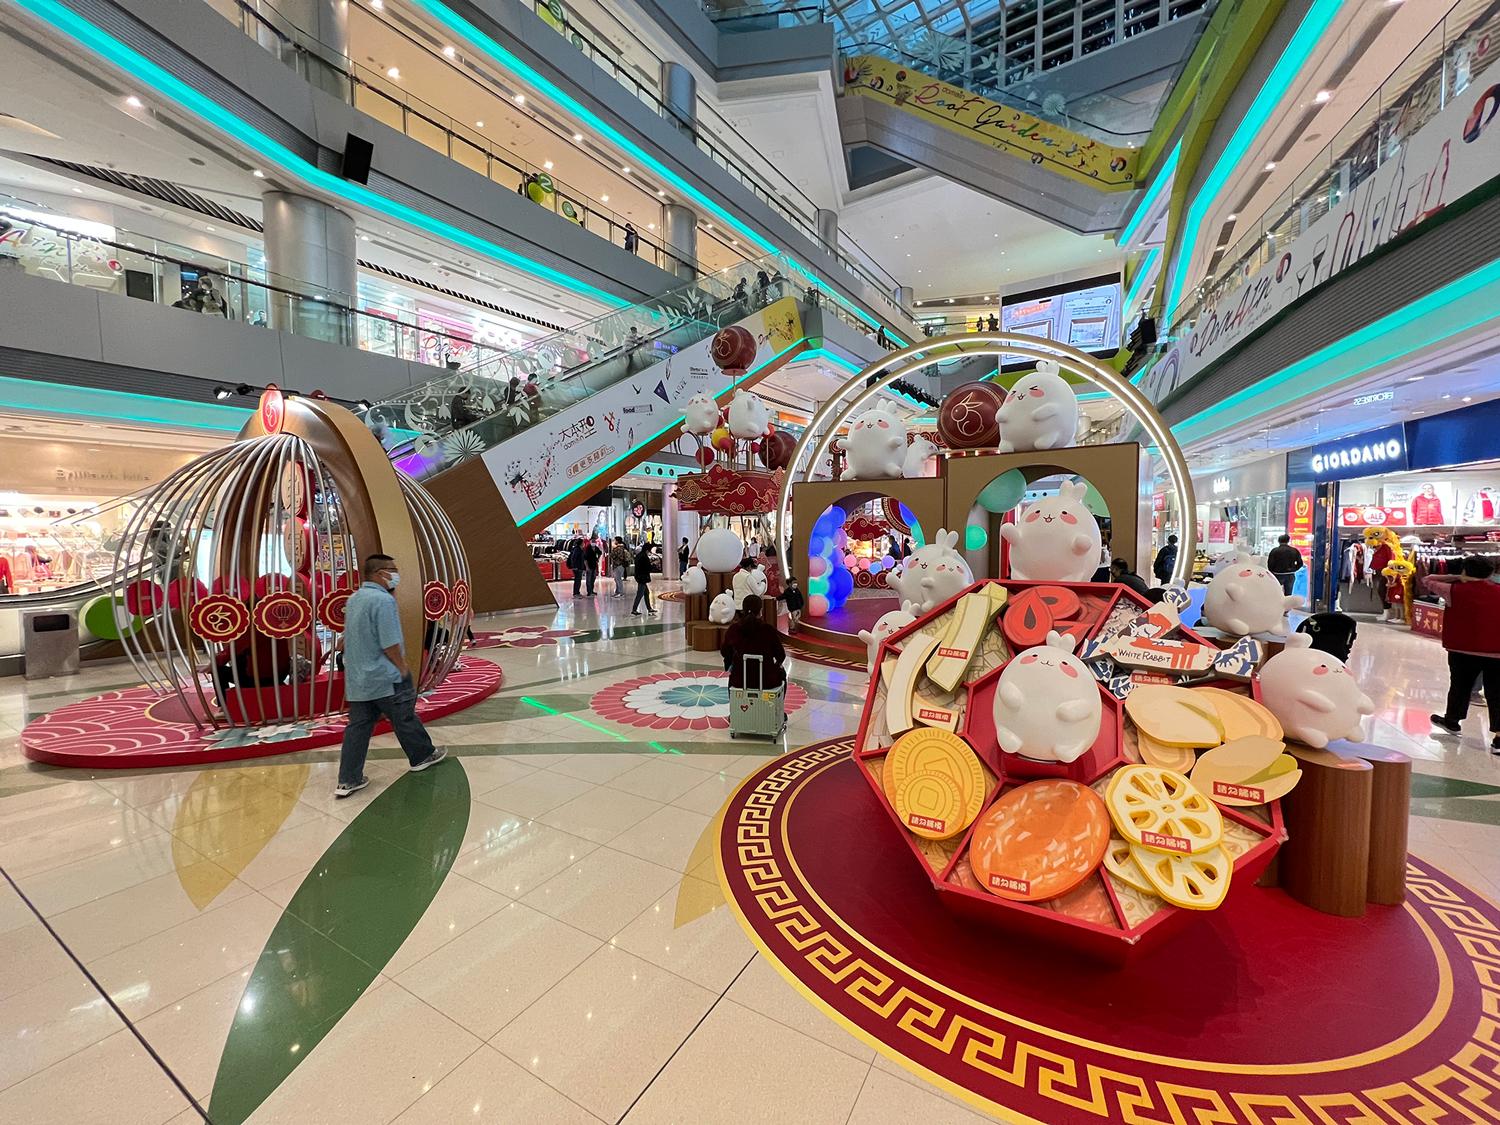 To welcome the Year of the Rabbit, the Hong Kong Housing Authority has put up festive decorations with lucky themes at Domain, its regional shopping centre in Yau Tong, Kowloon.